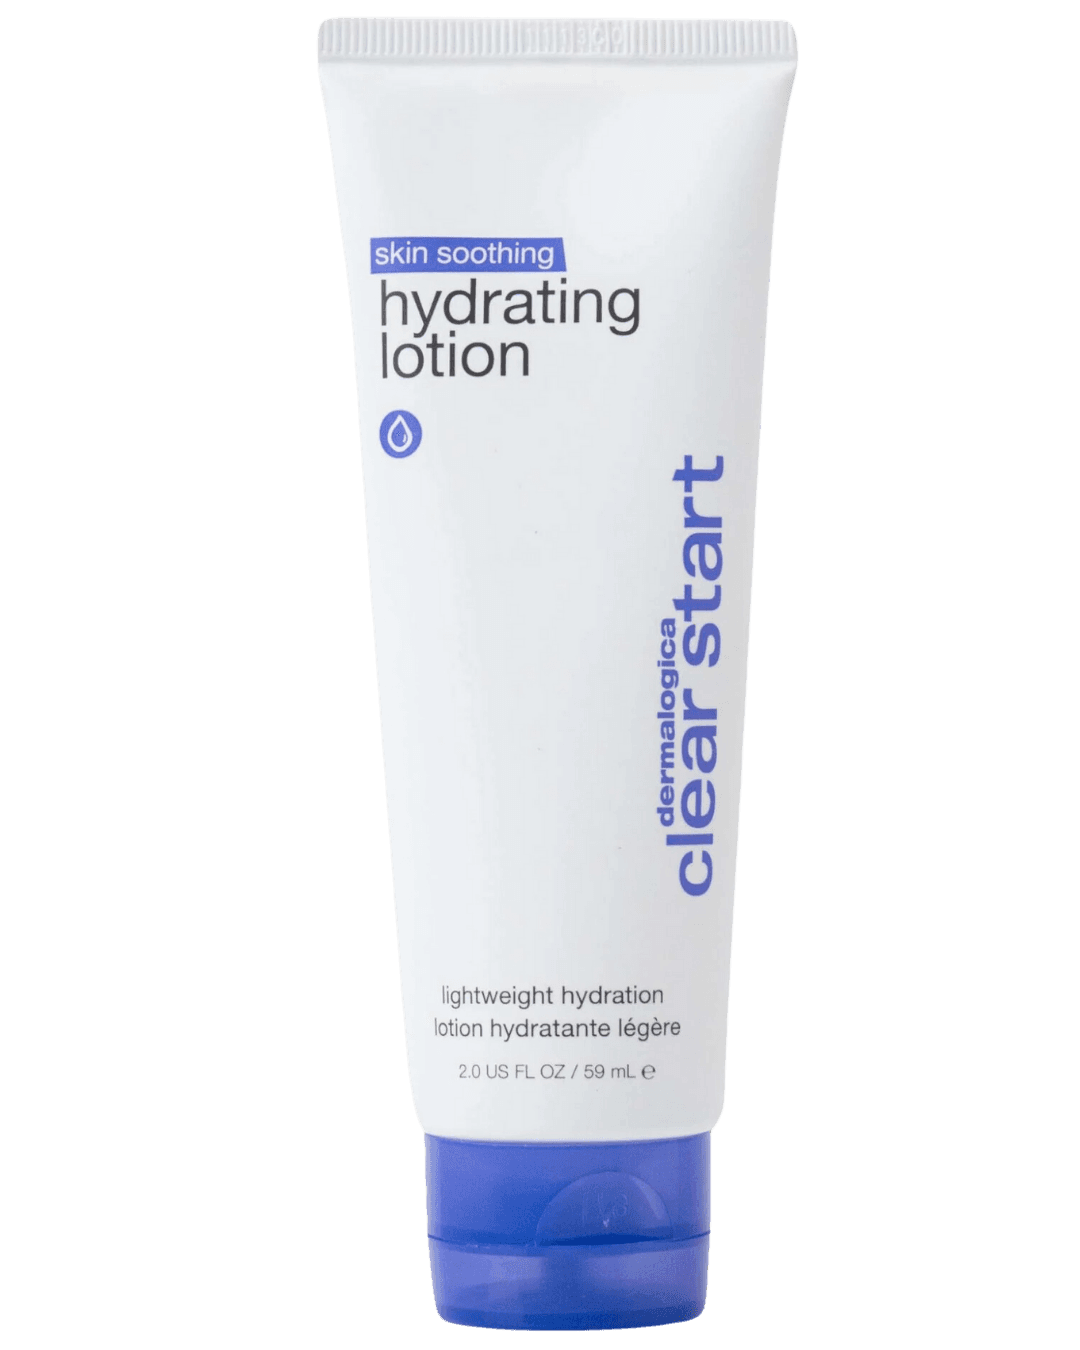 Clear Start by Dermalogica Skin Soothing Hydrating Lotion